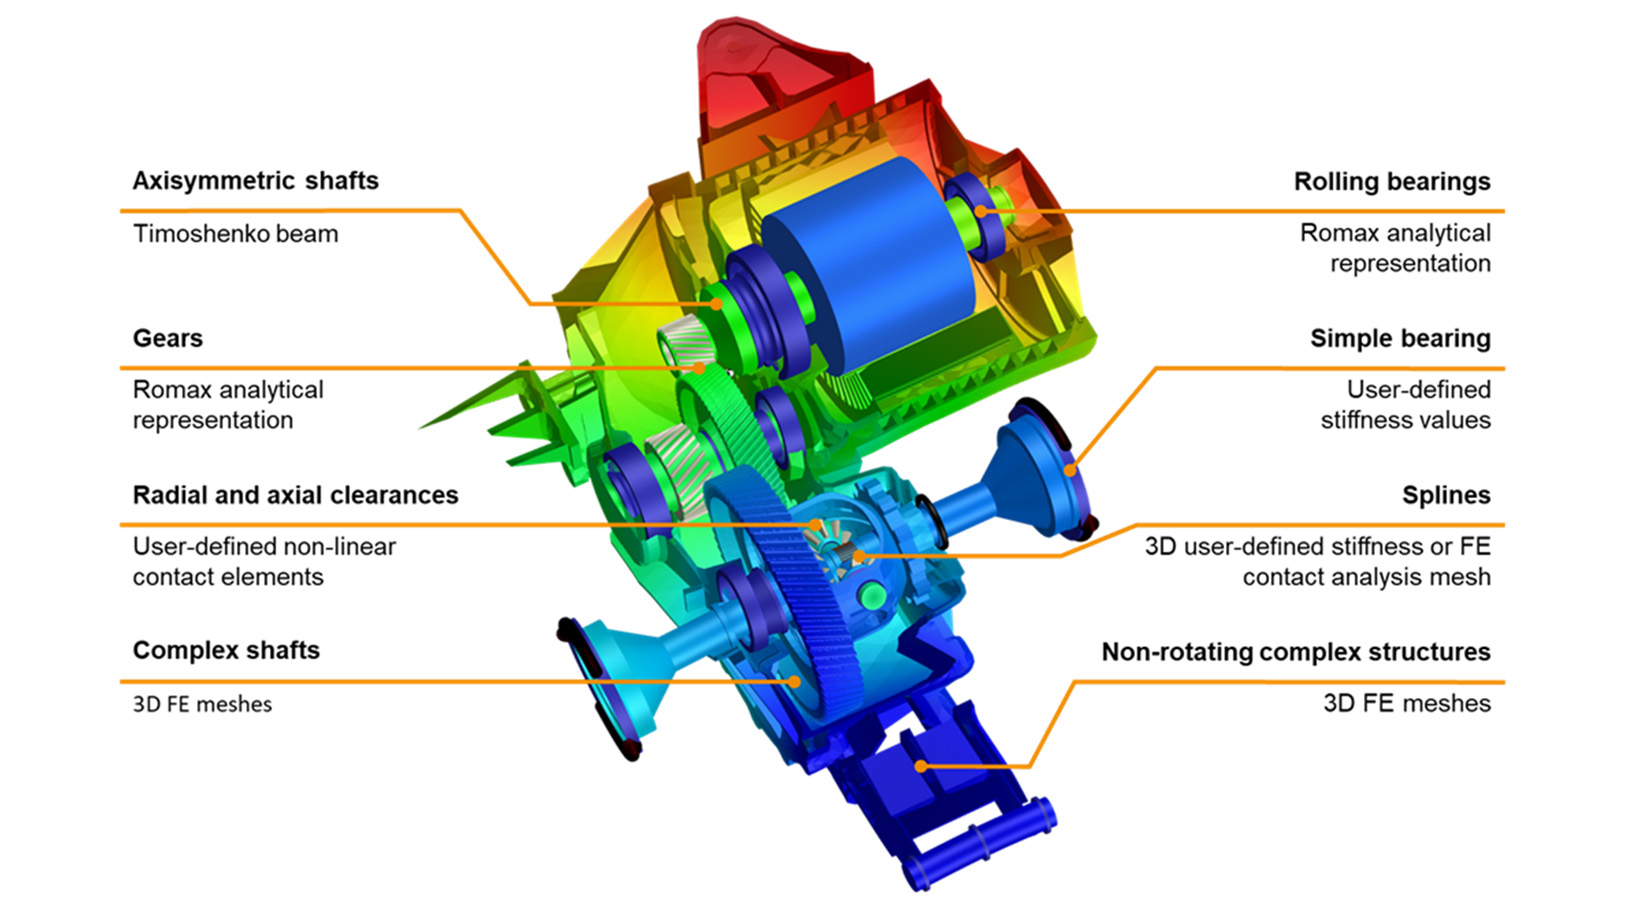 Romax full system gearbox simulation model, with annotations to show various ways of modelling components with varying fidelity 